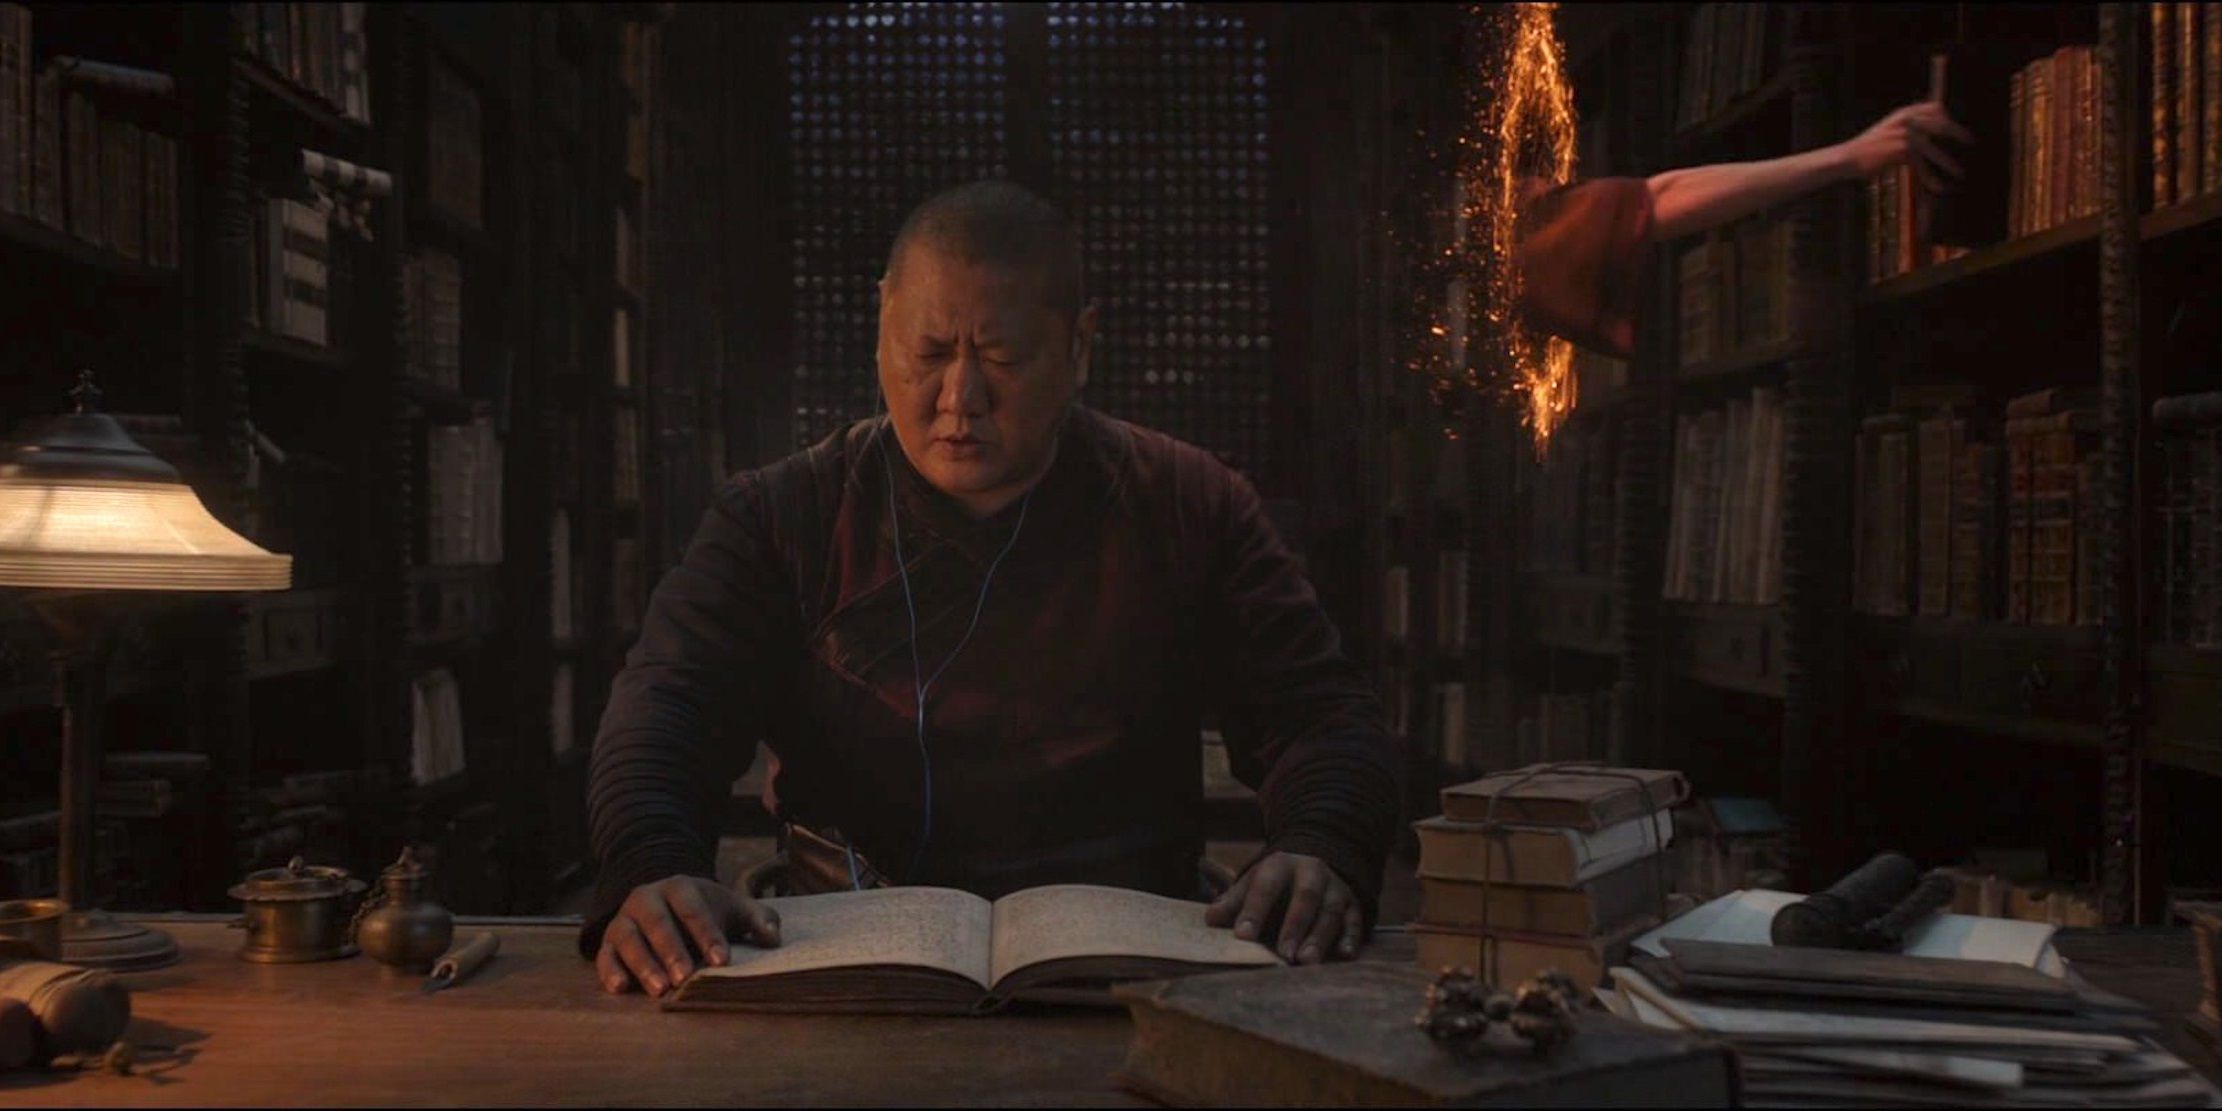 Strange steals books from the library before calling Wong Beyonce in Doctor Strange